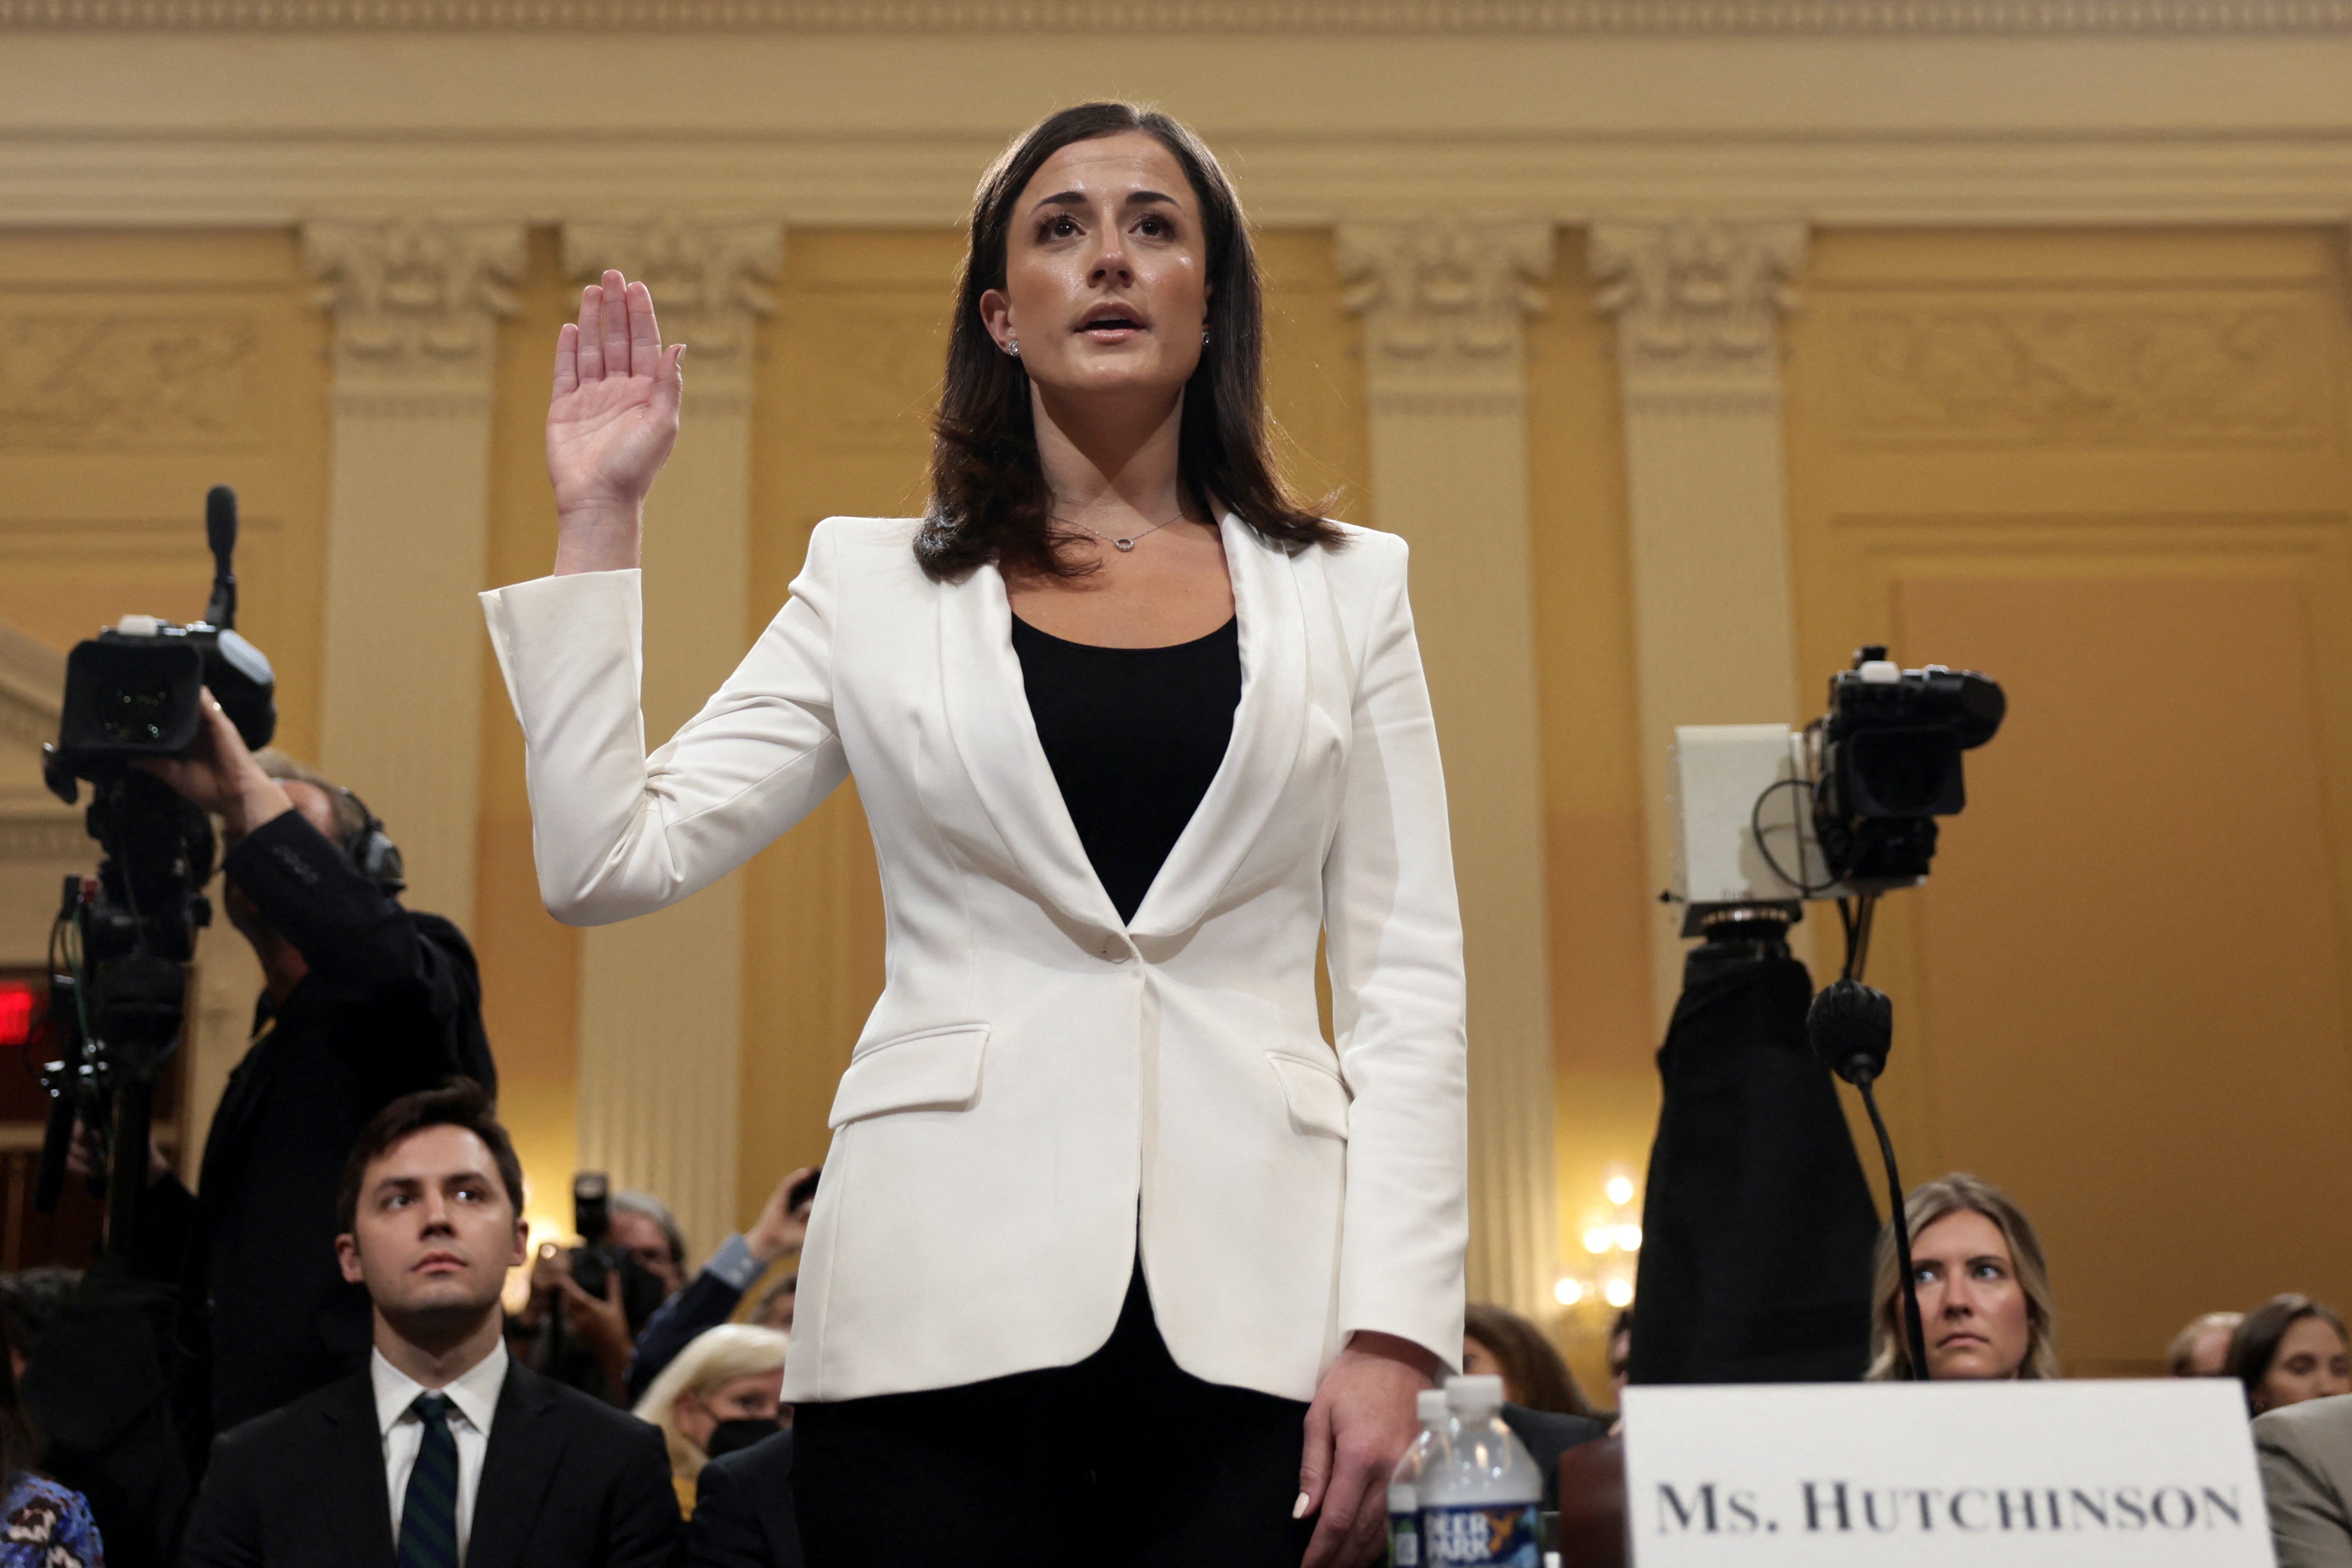 Cassidy Hutchinson, who was an aide in the Trump White House, is sworn in to testify during a public hearing of the U.S. House Select Committee to investigate the January 6 Attack on June 28.